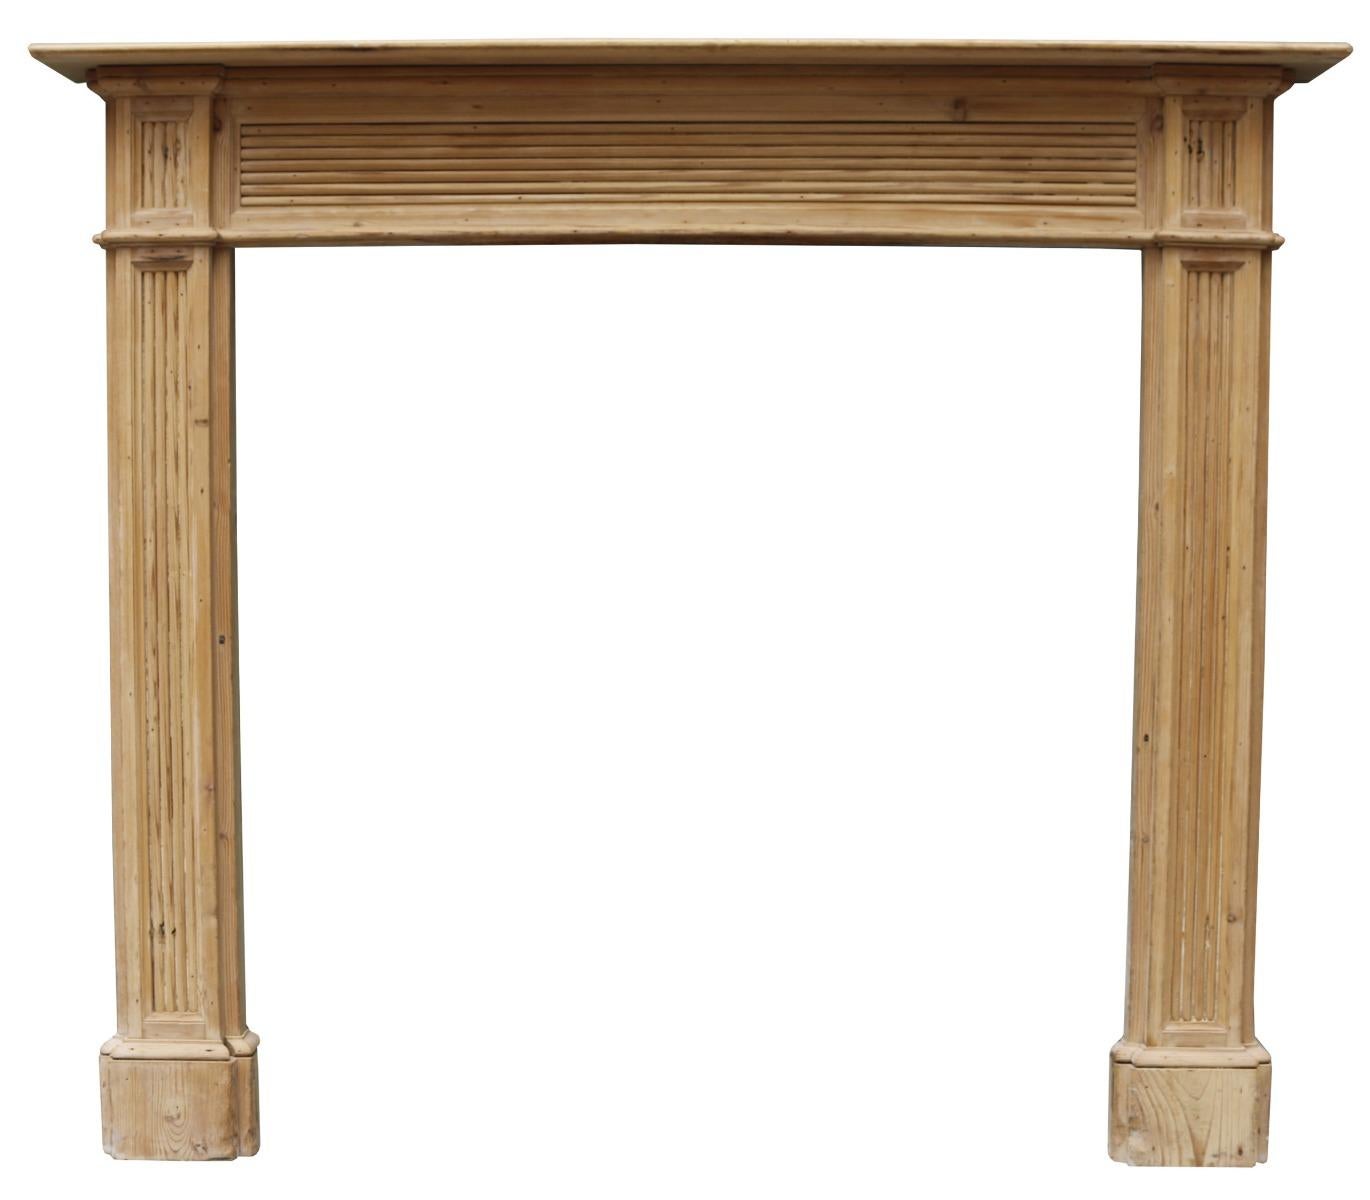 A simple and elegant mid 19th century fireplace with reeded jambs and frieze
 
 
Additional Dimensions:
 
Opening Height 112 cm
 
Opening Width 110.5 cm
 
Width between outsides of the foot blocks 144.5 cm